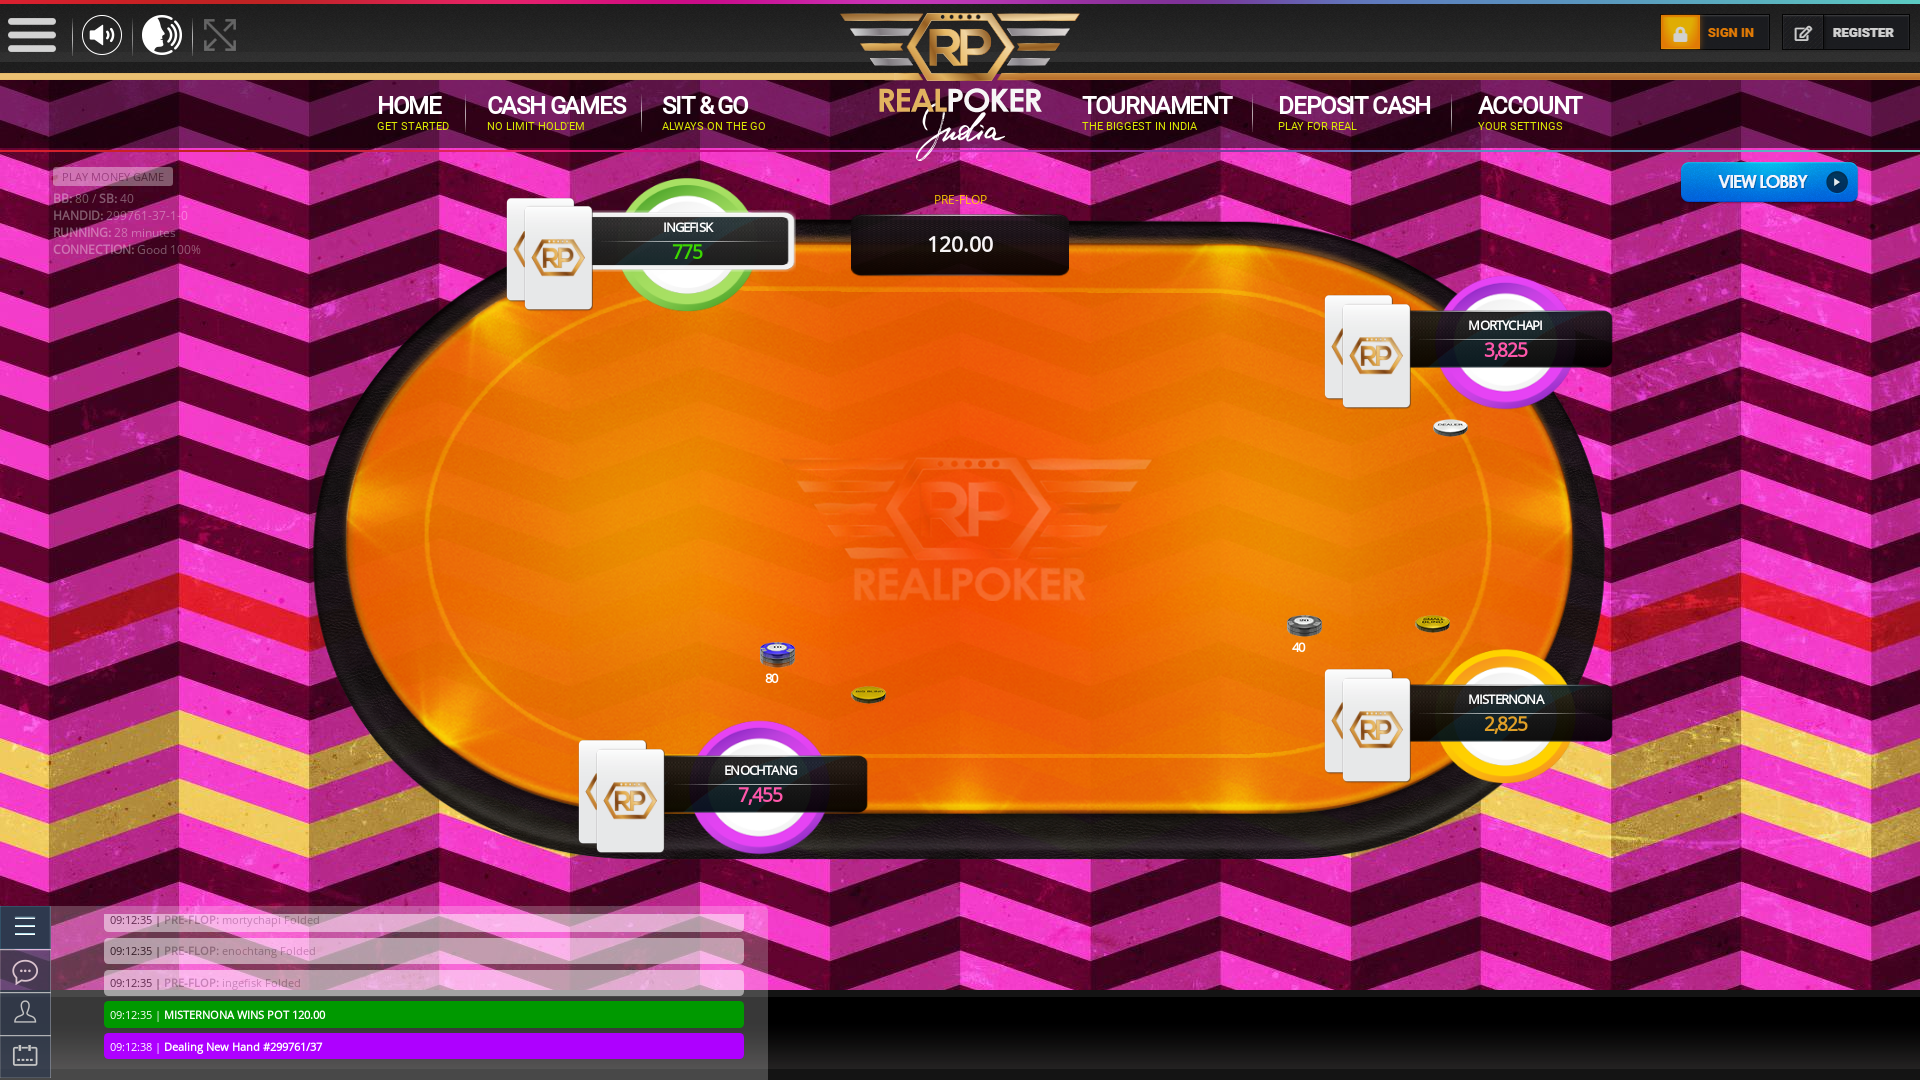 Real Indian poker on a 10 player table in the 28th minute of the game